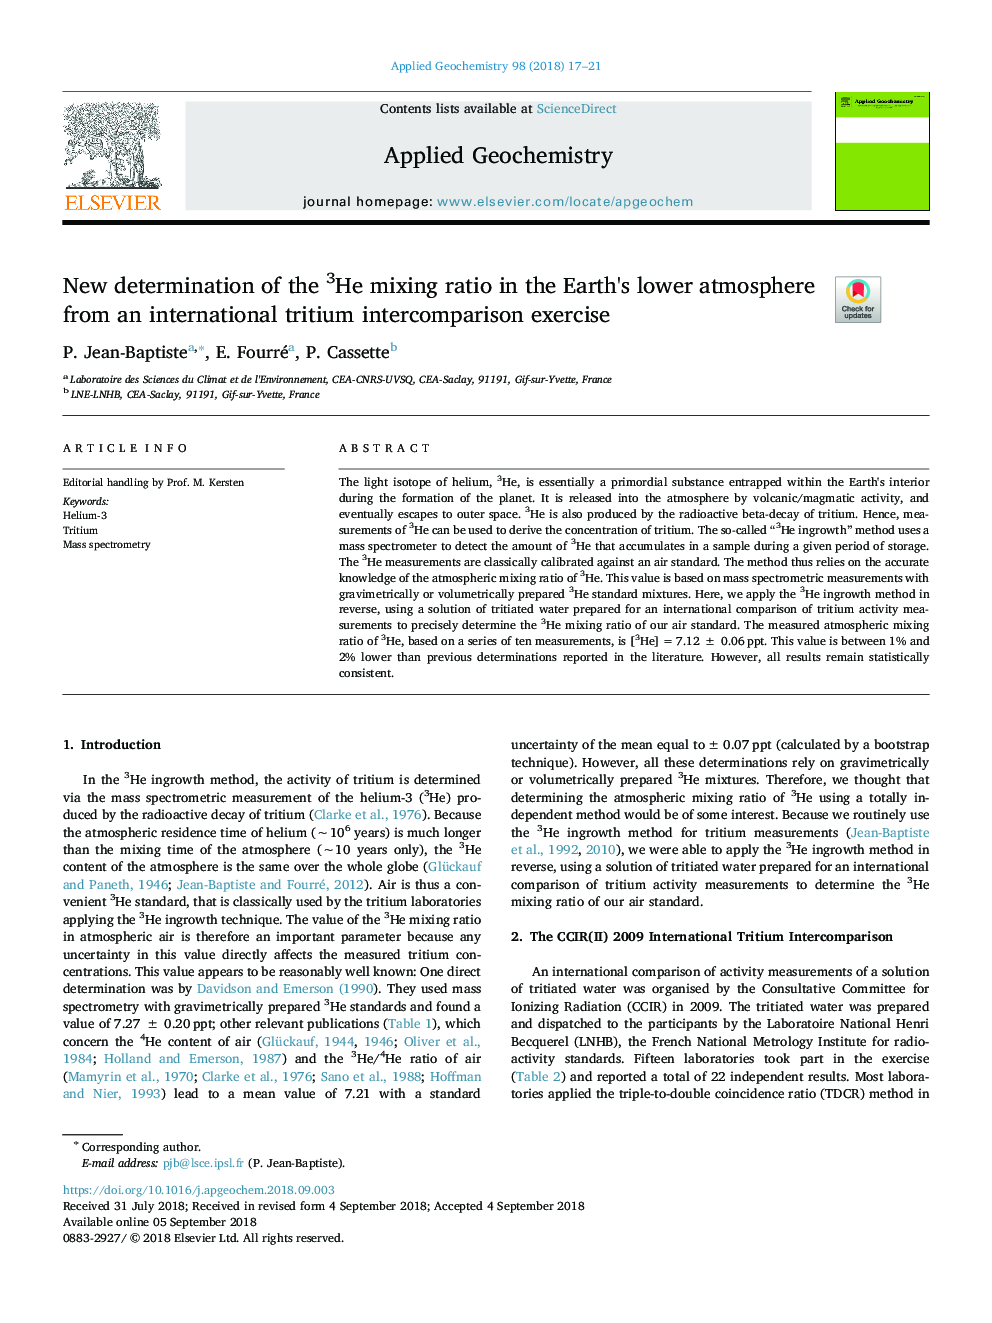 New determination of the 3He mixing ratio in the Earth's lower atmosphere from an international tritium intercomparison exercise